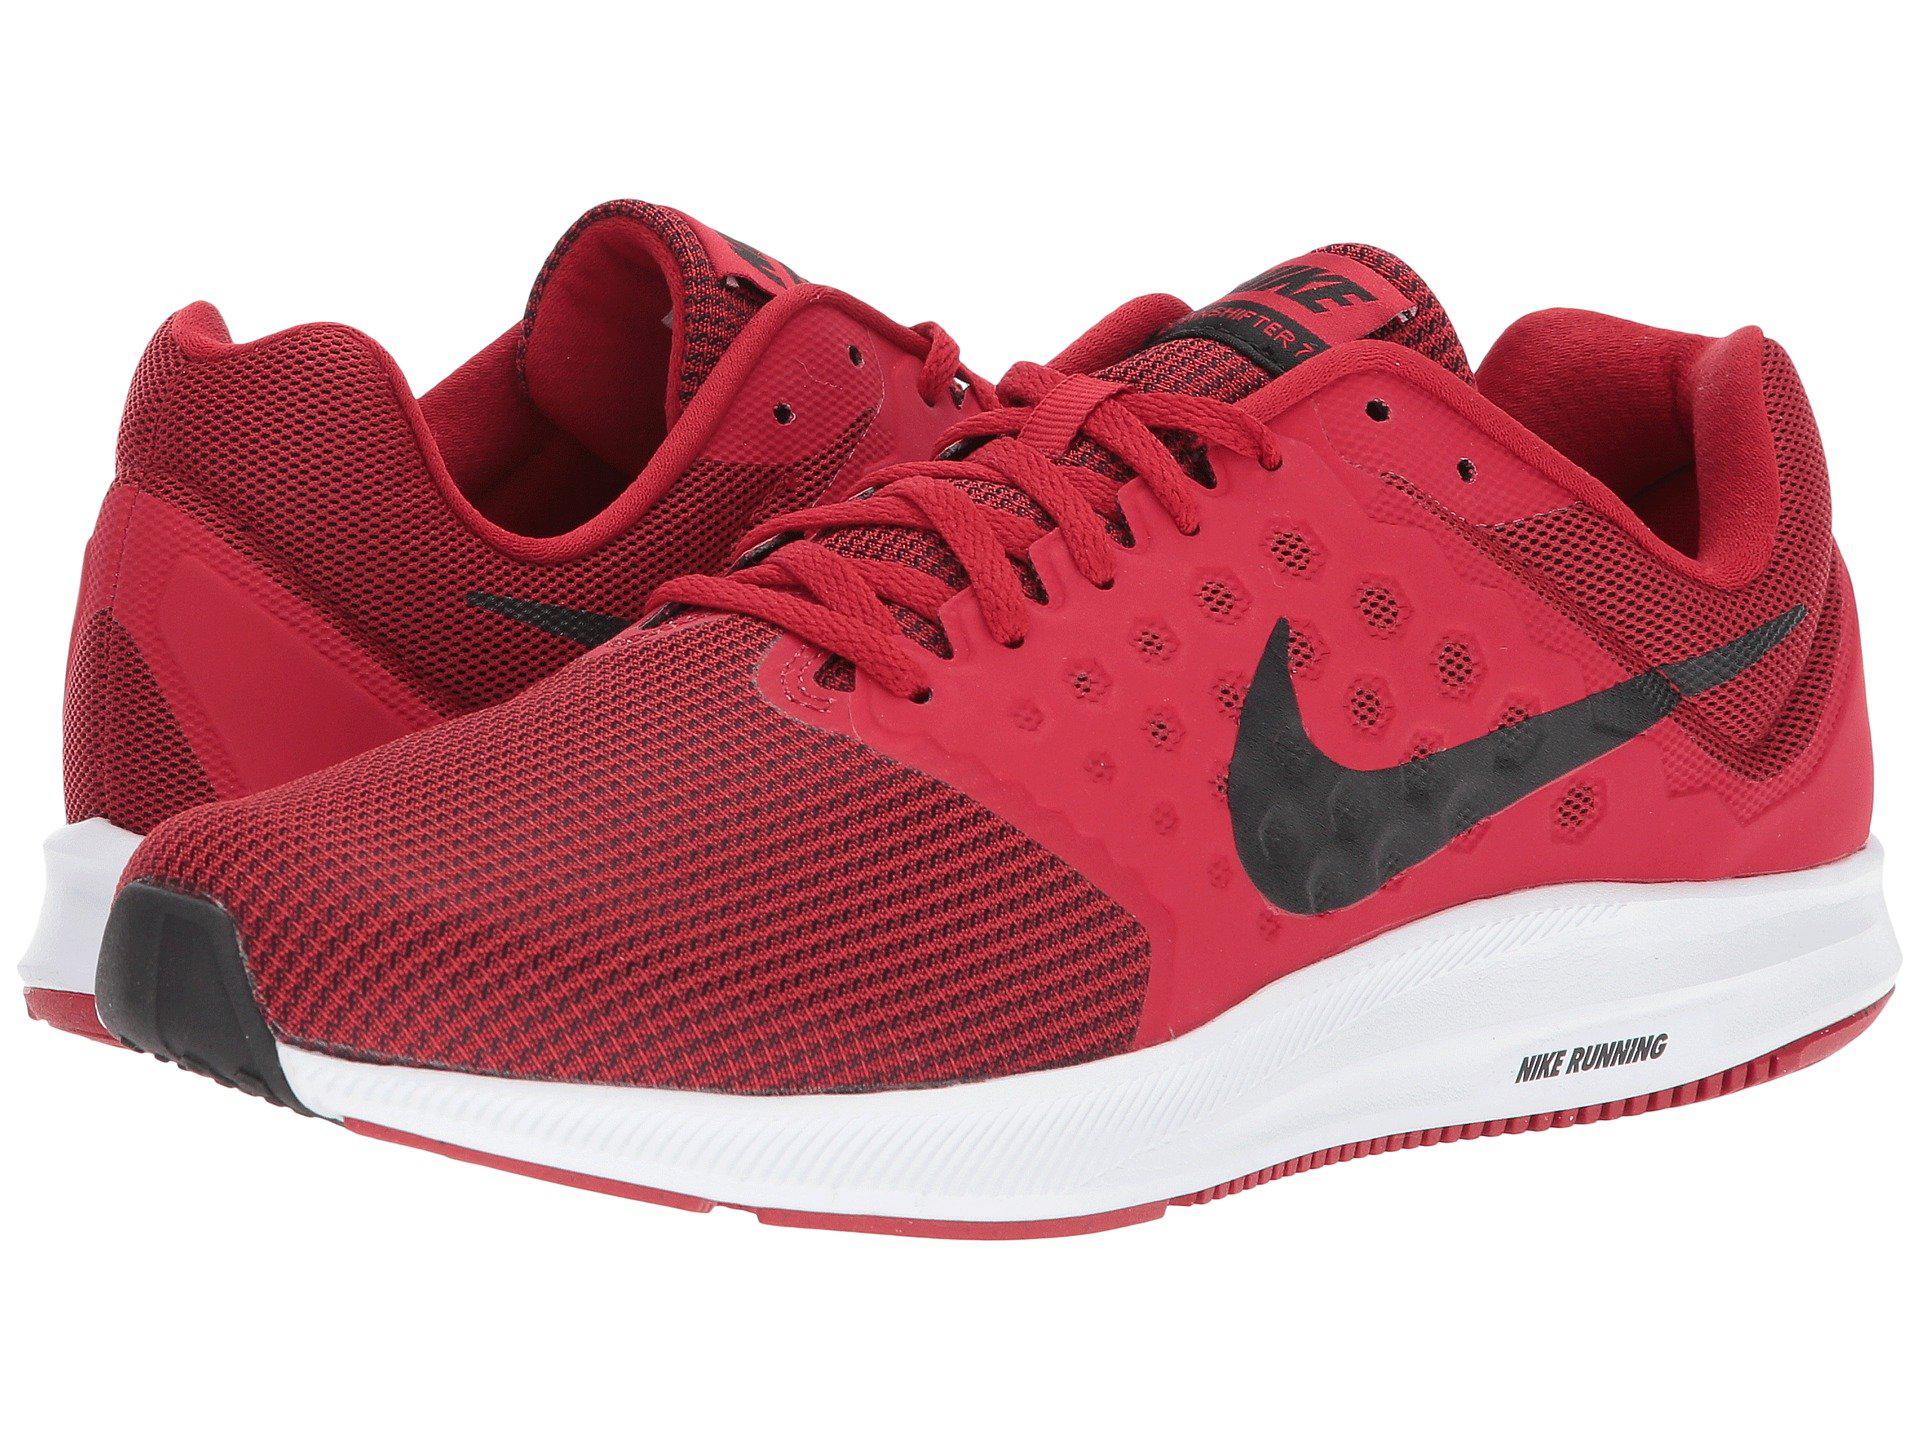 Nike Synthetic Downshifter 7 Running Shoe in University Red Black White (Red)  for Men - Lyst